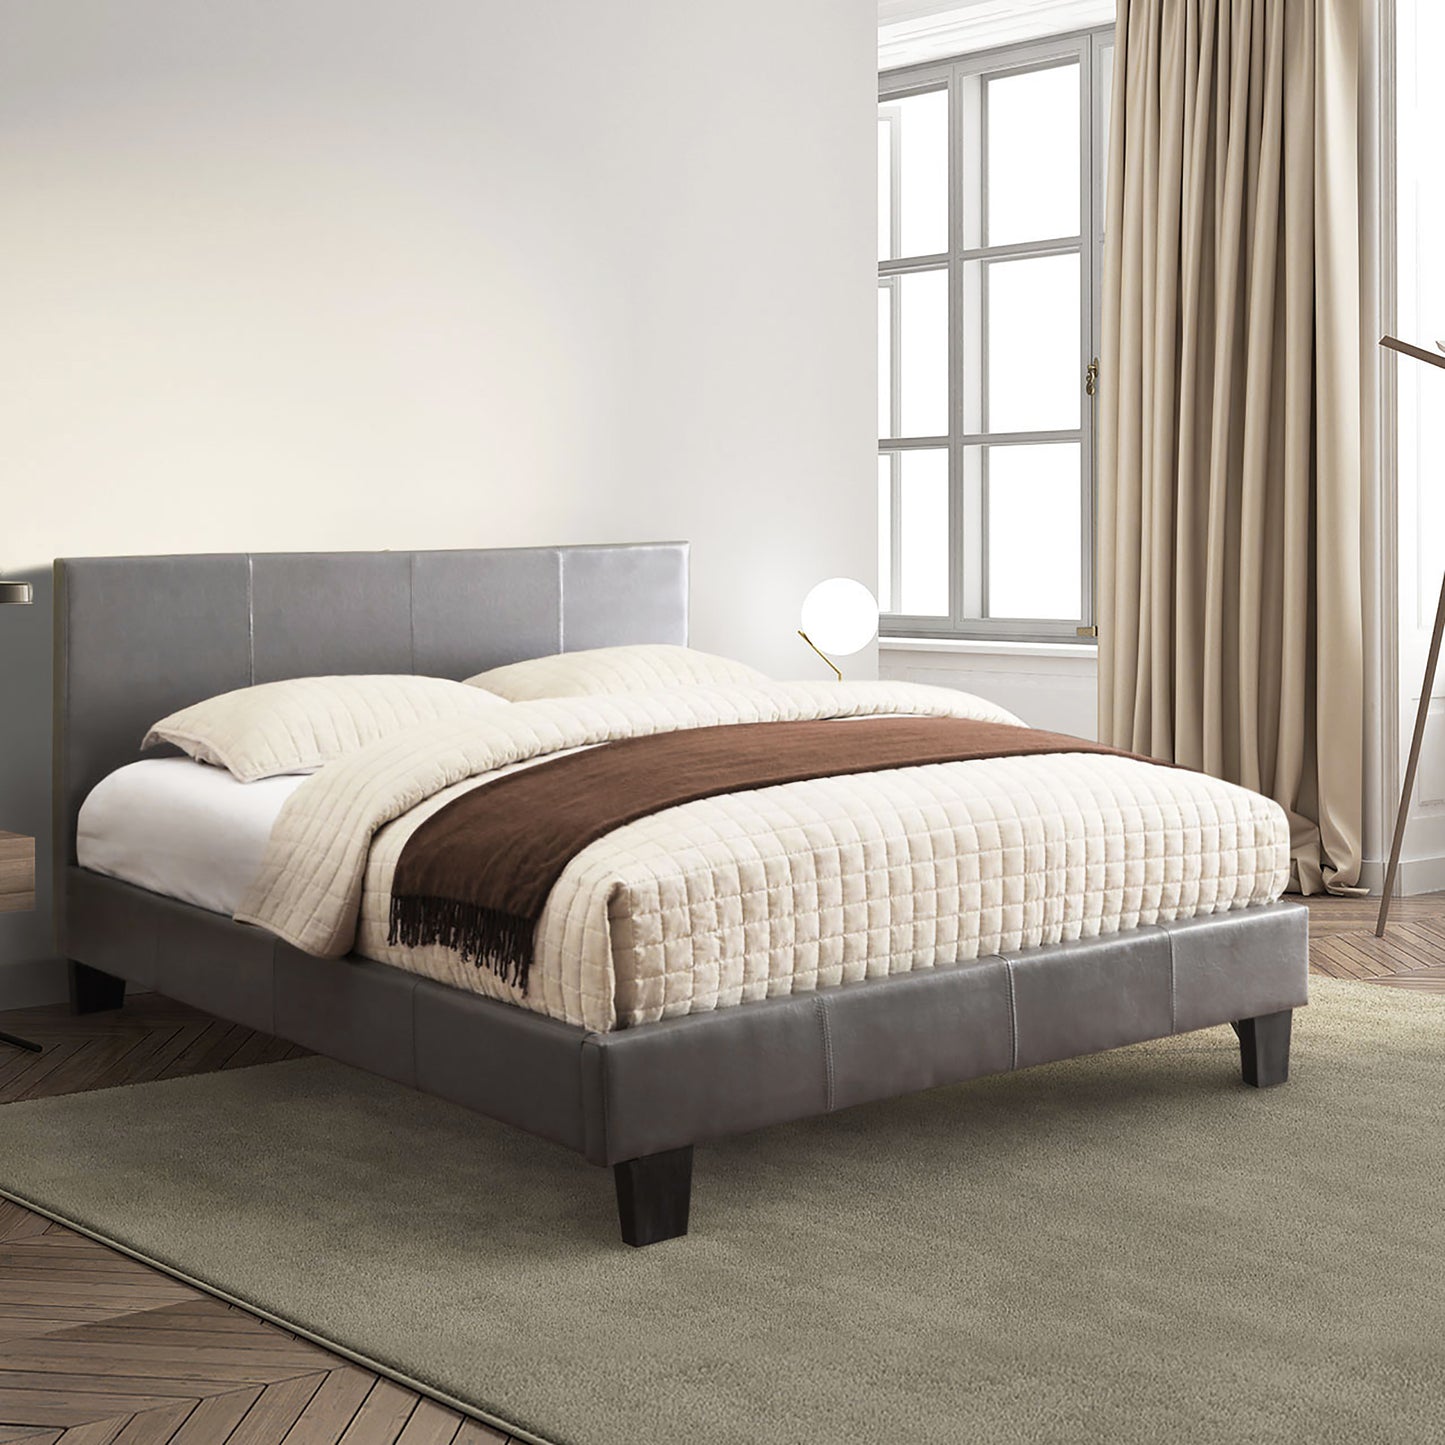 Right angled contemporary gray faux leather full platform bed in a bedroom with accessories